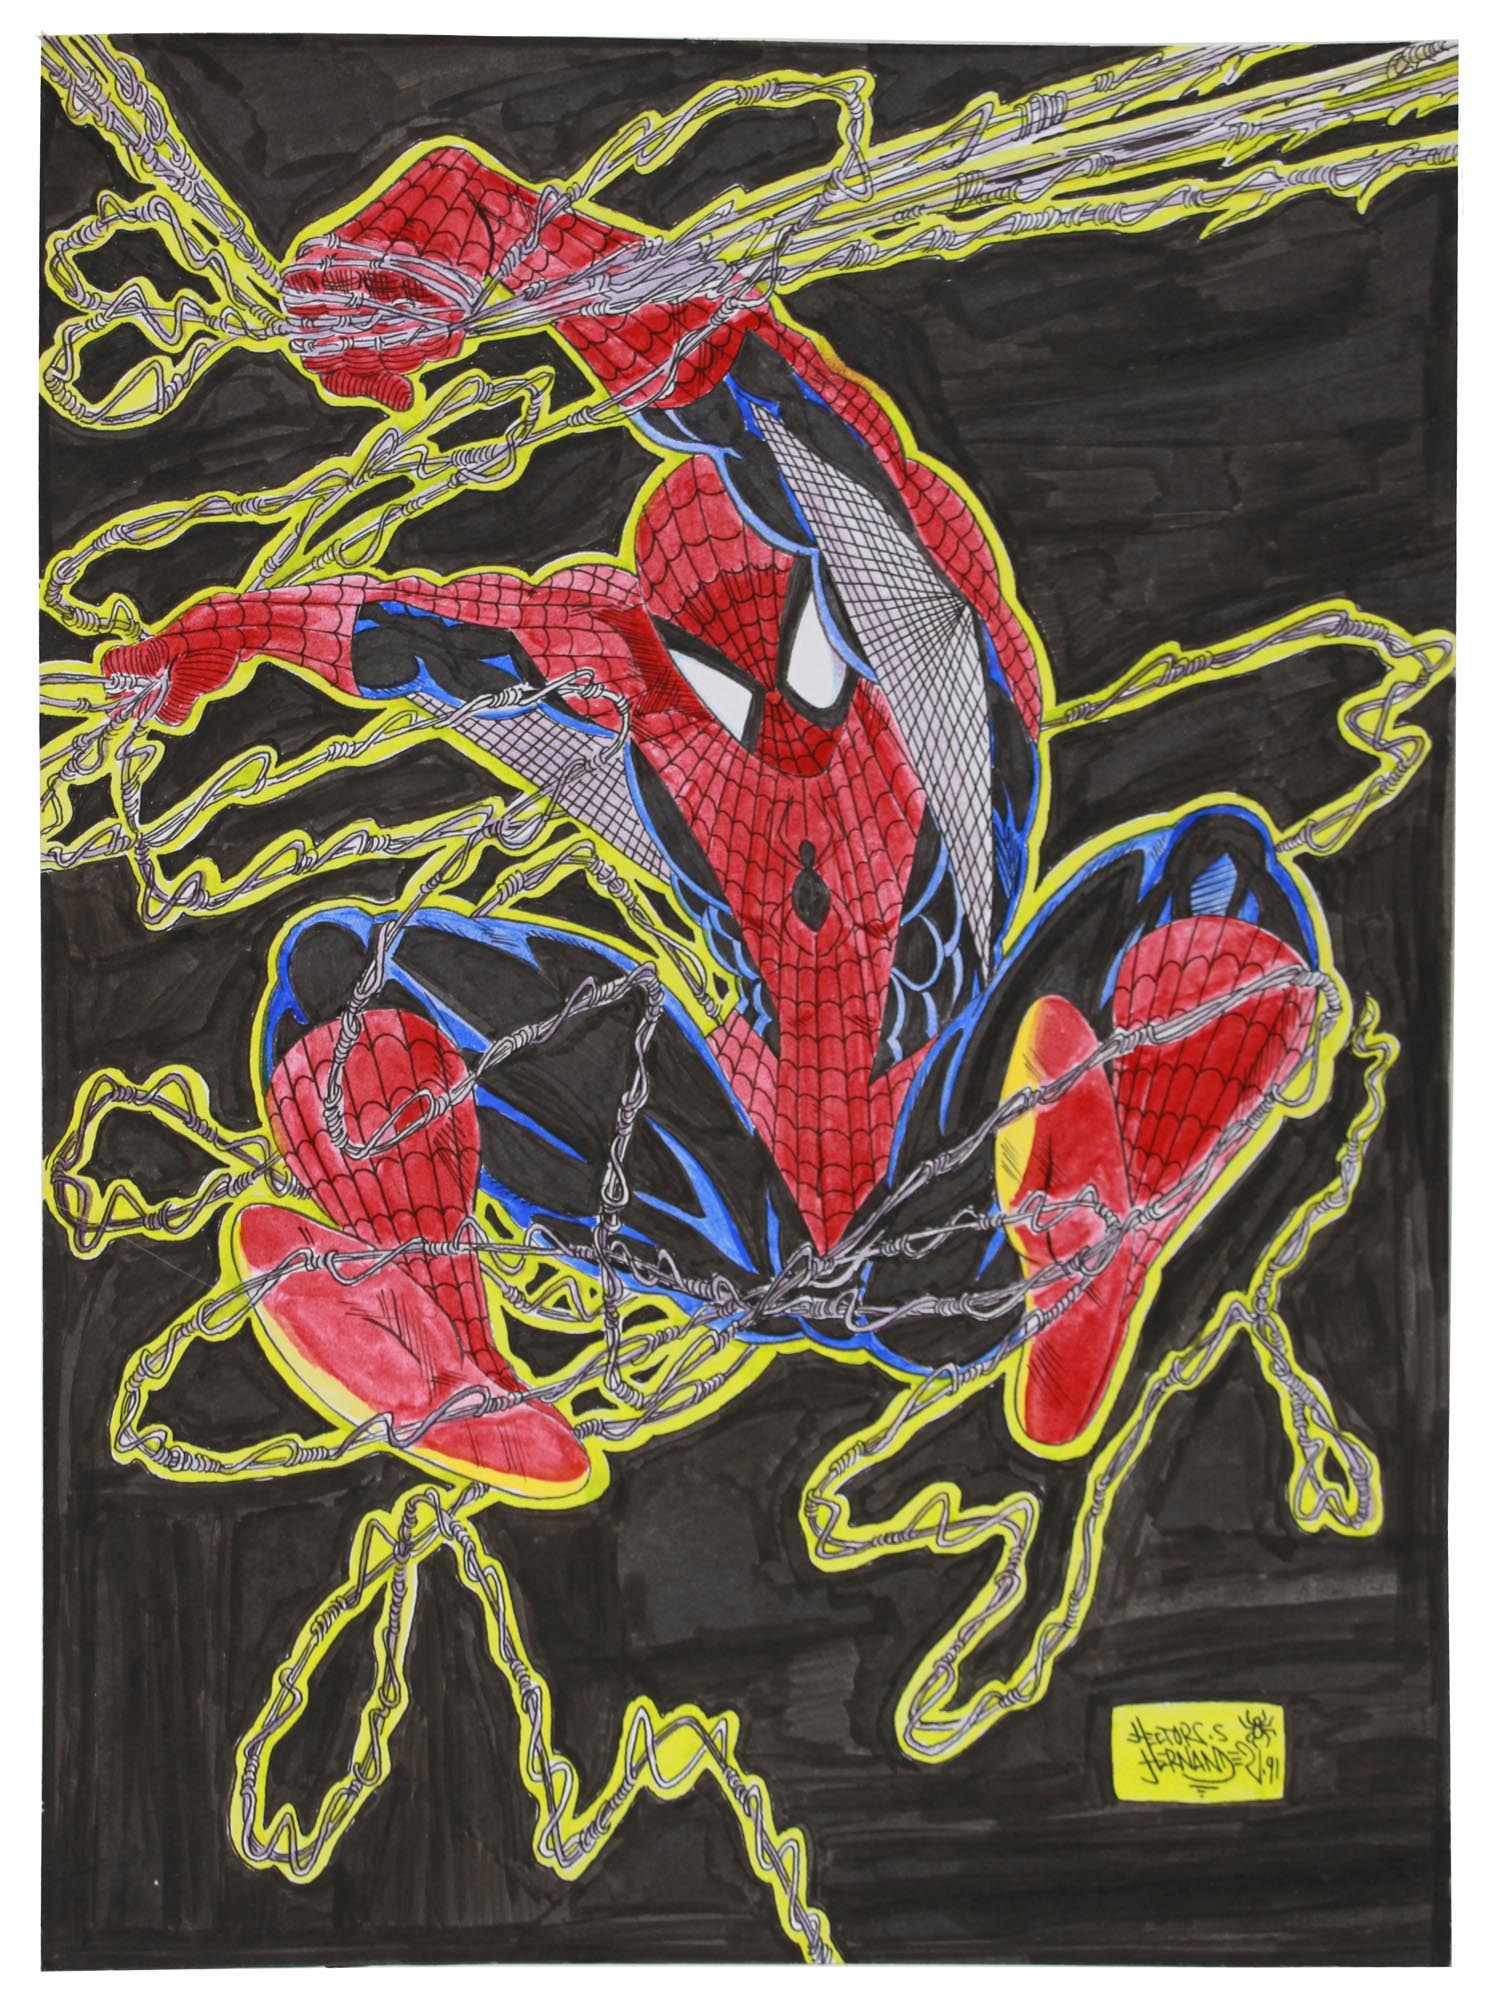 2 SPIDER-MAN PAINTINGS SIGNED BY HECTOR HERNANDEZ PIC-2